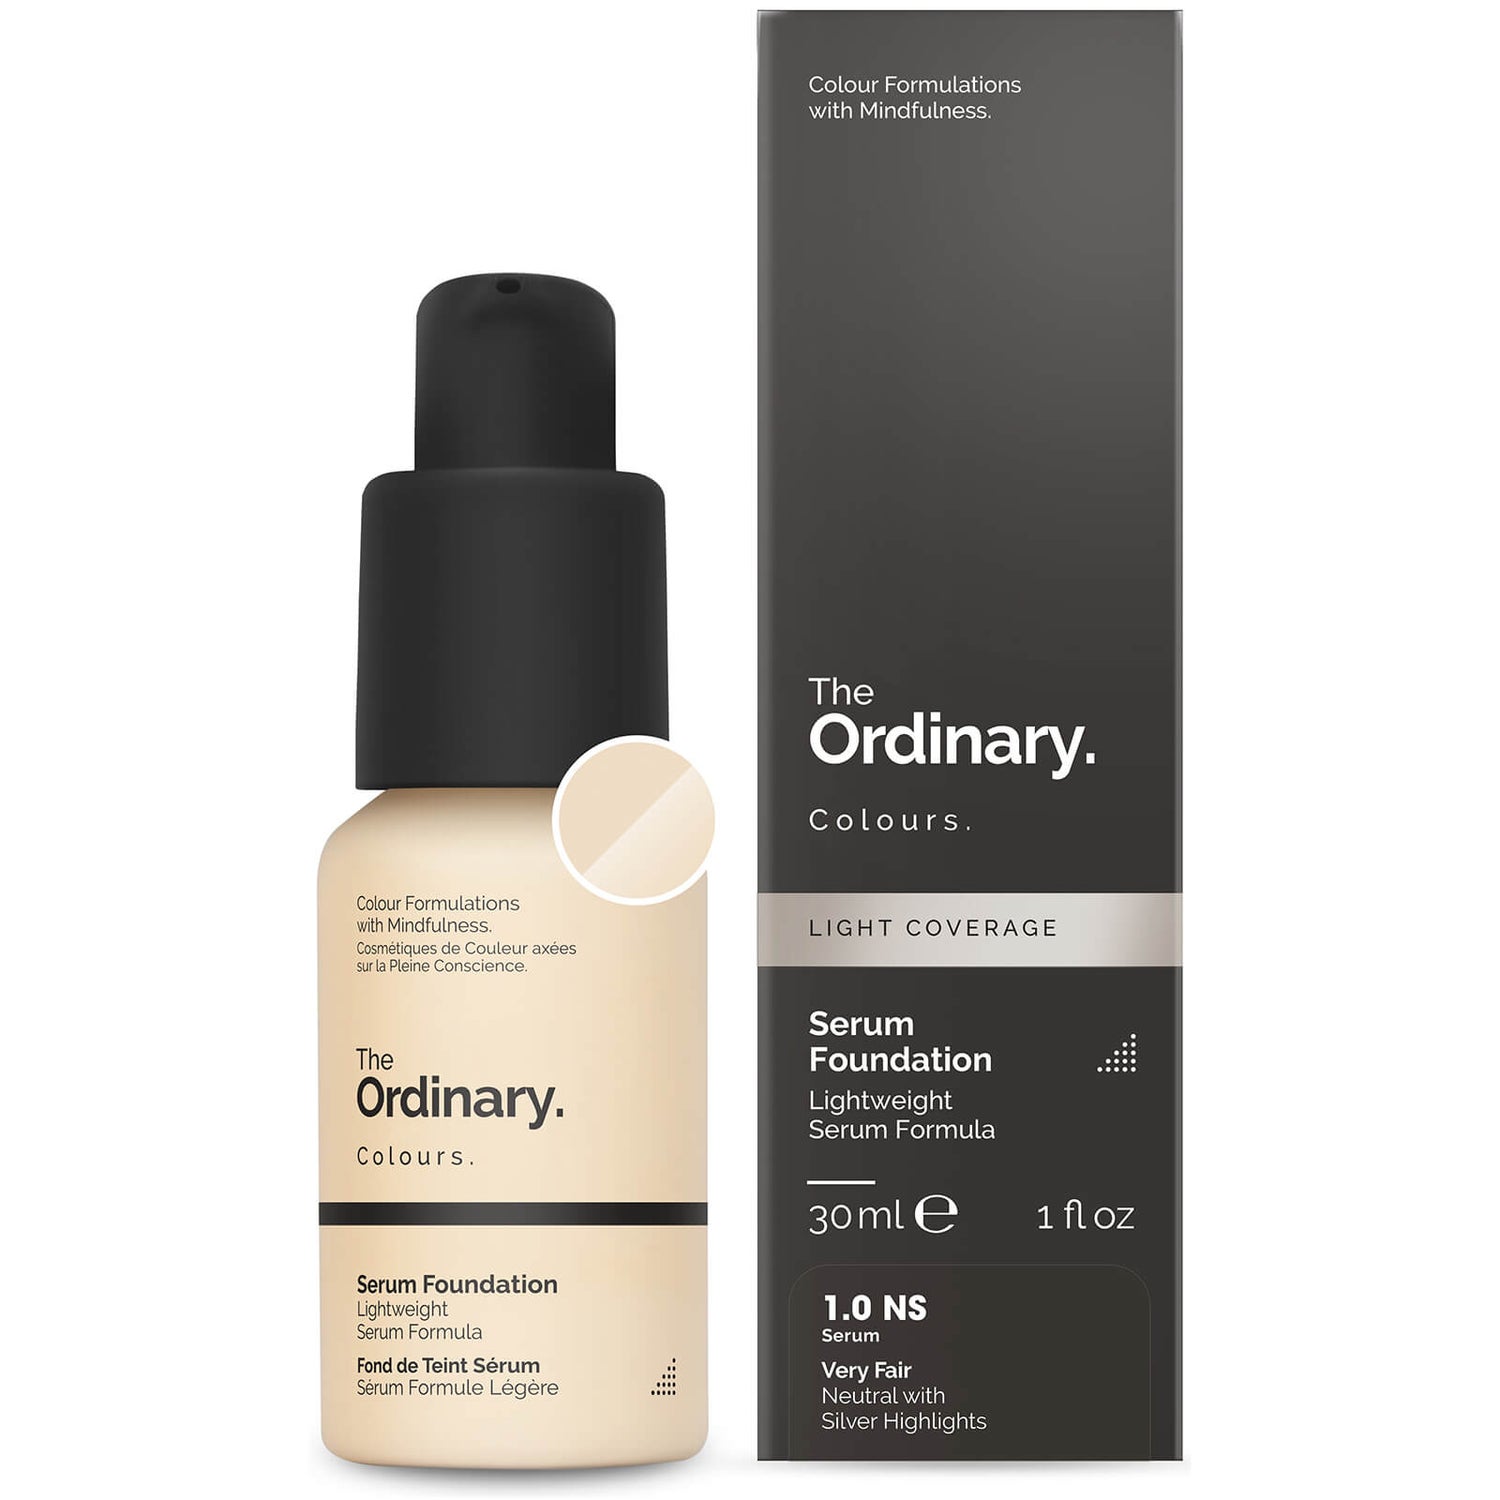 The Ordinary Serum Foundation with SPF 15 by The Ordinary Colours 30ml (Various Shades) - 1.0NS